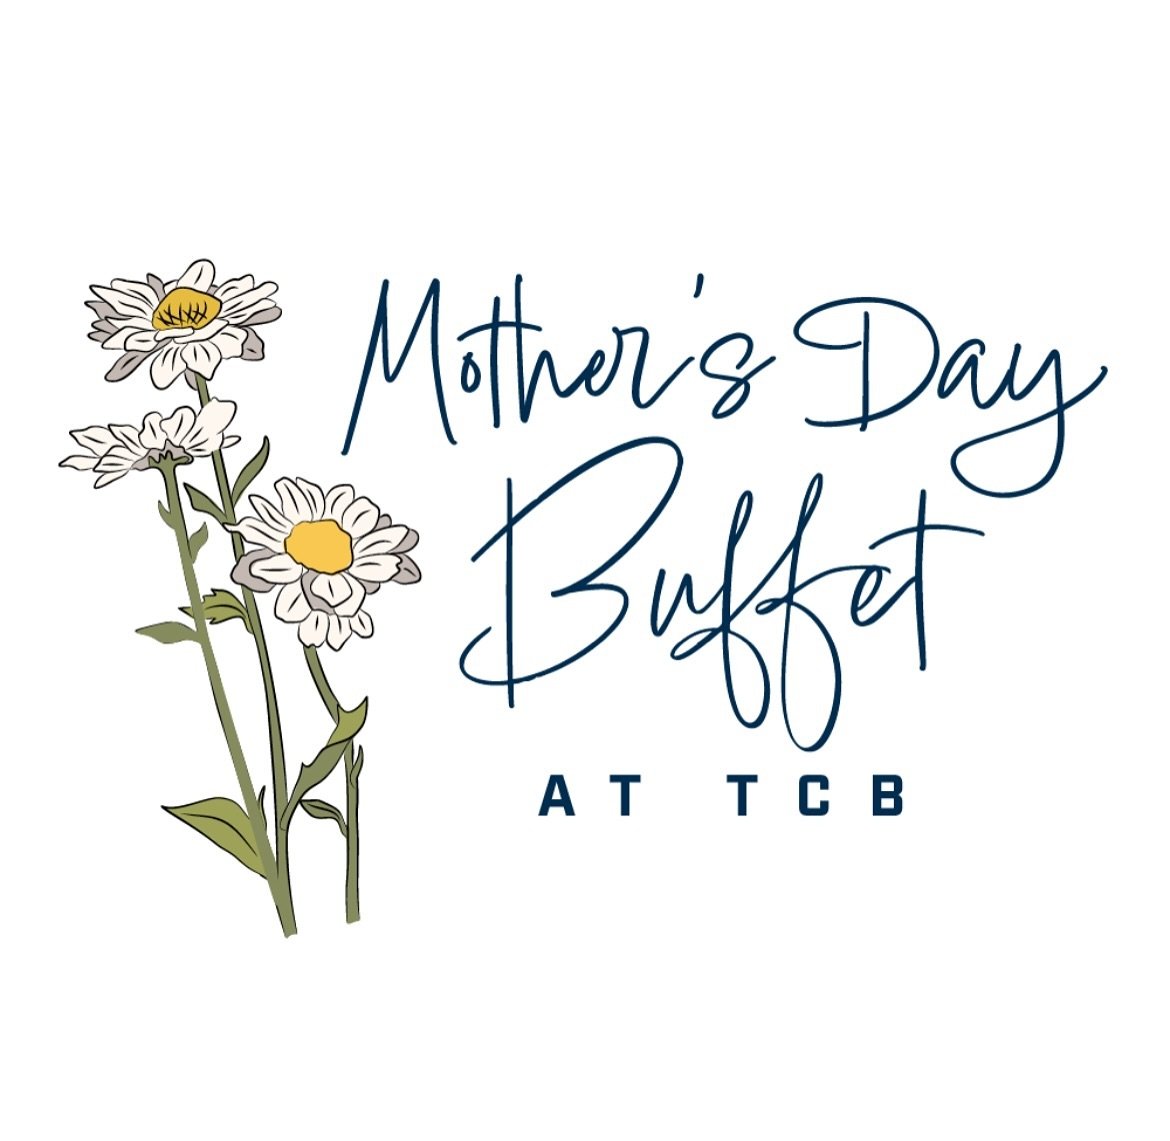 Treat the mom in your life to beer and pizza this Mother&rsquo;s Day!🌷

Join us on Sunday, May 12th, for delicious appetizers, a pizza buffet, and cold beer to celebrate the mom in your life. To top it off, each mom receives a special gift for doing